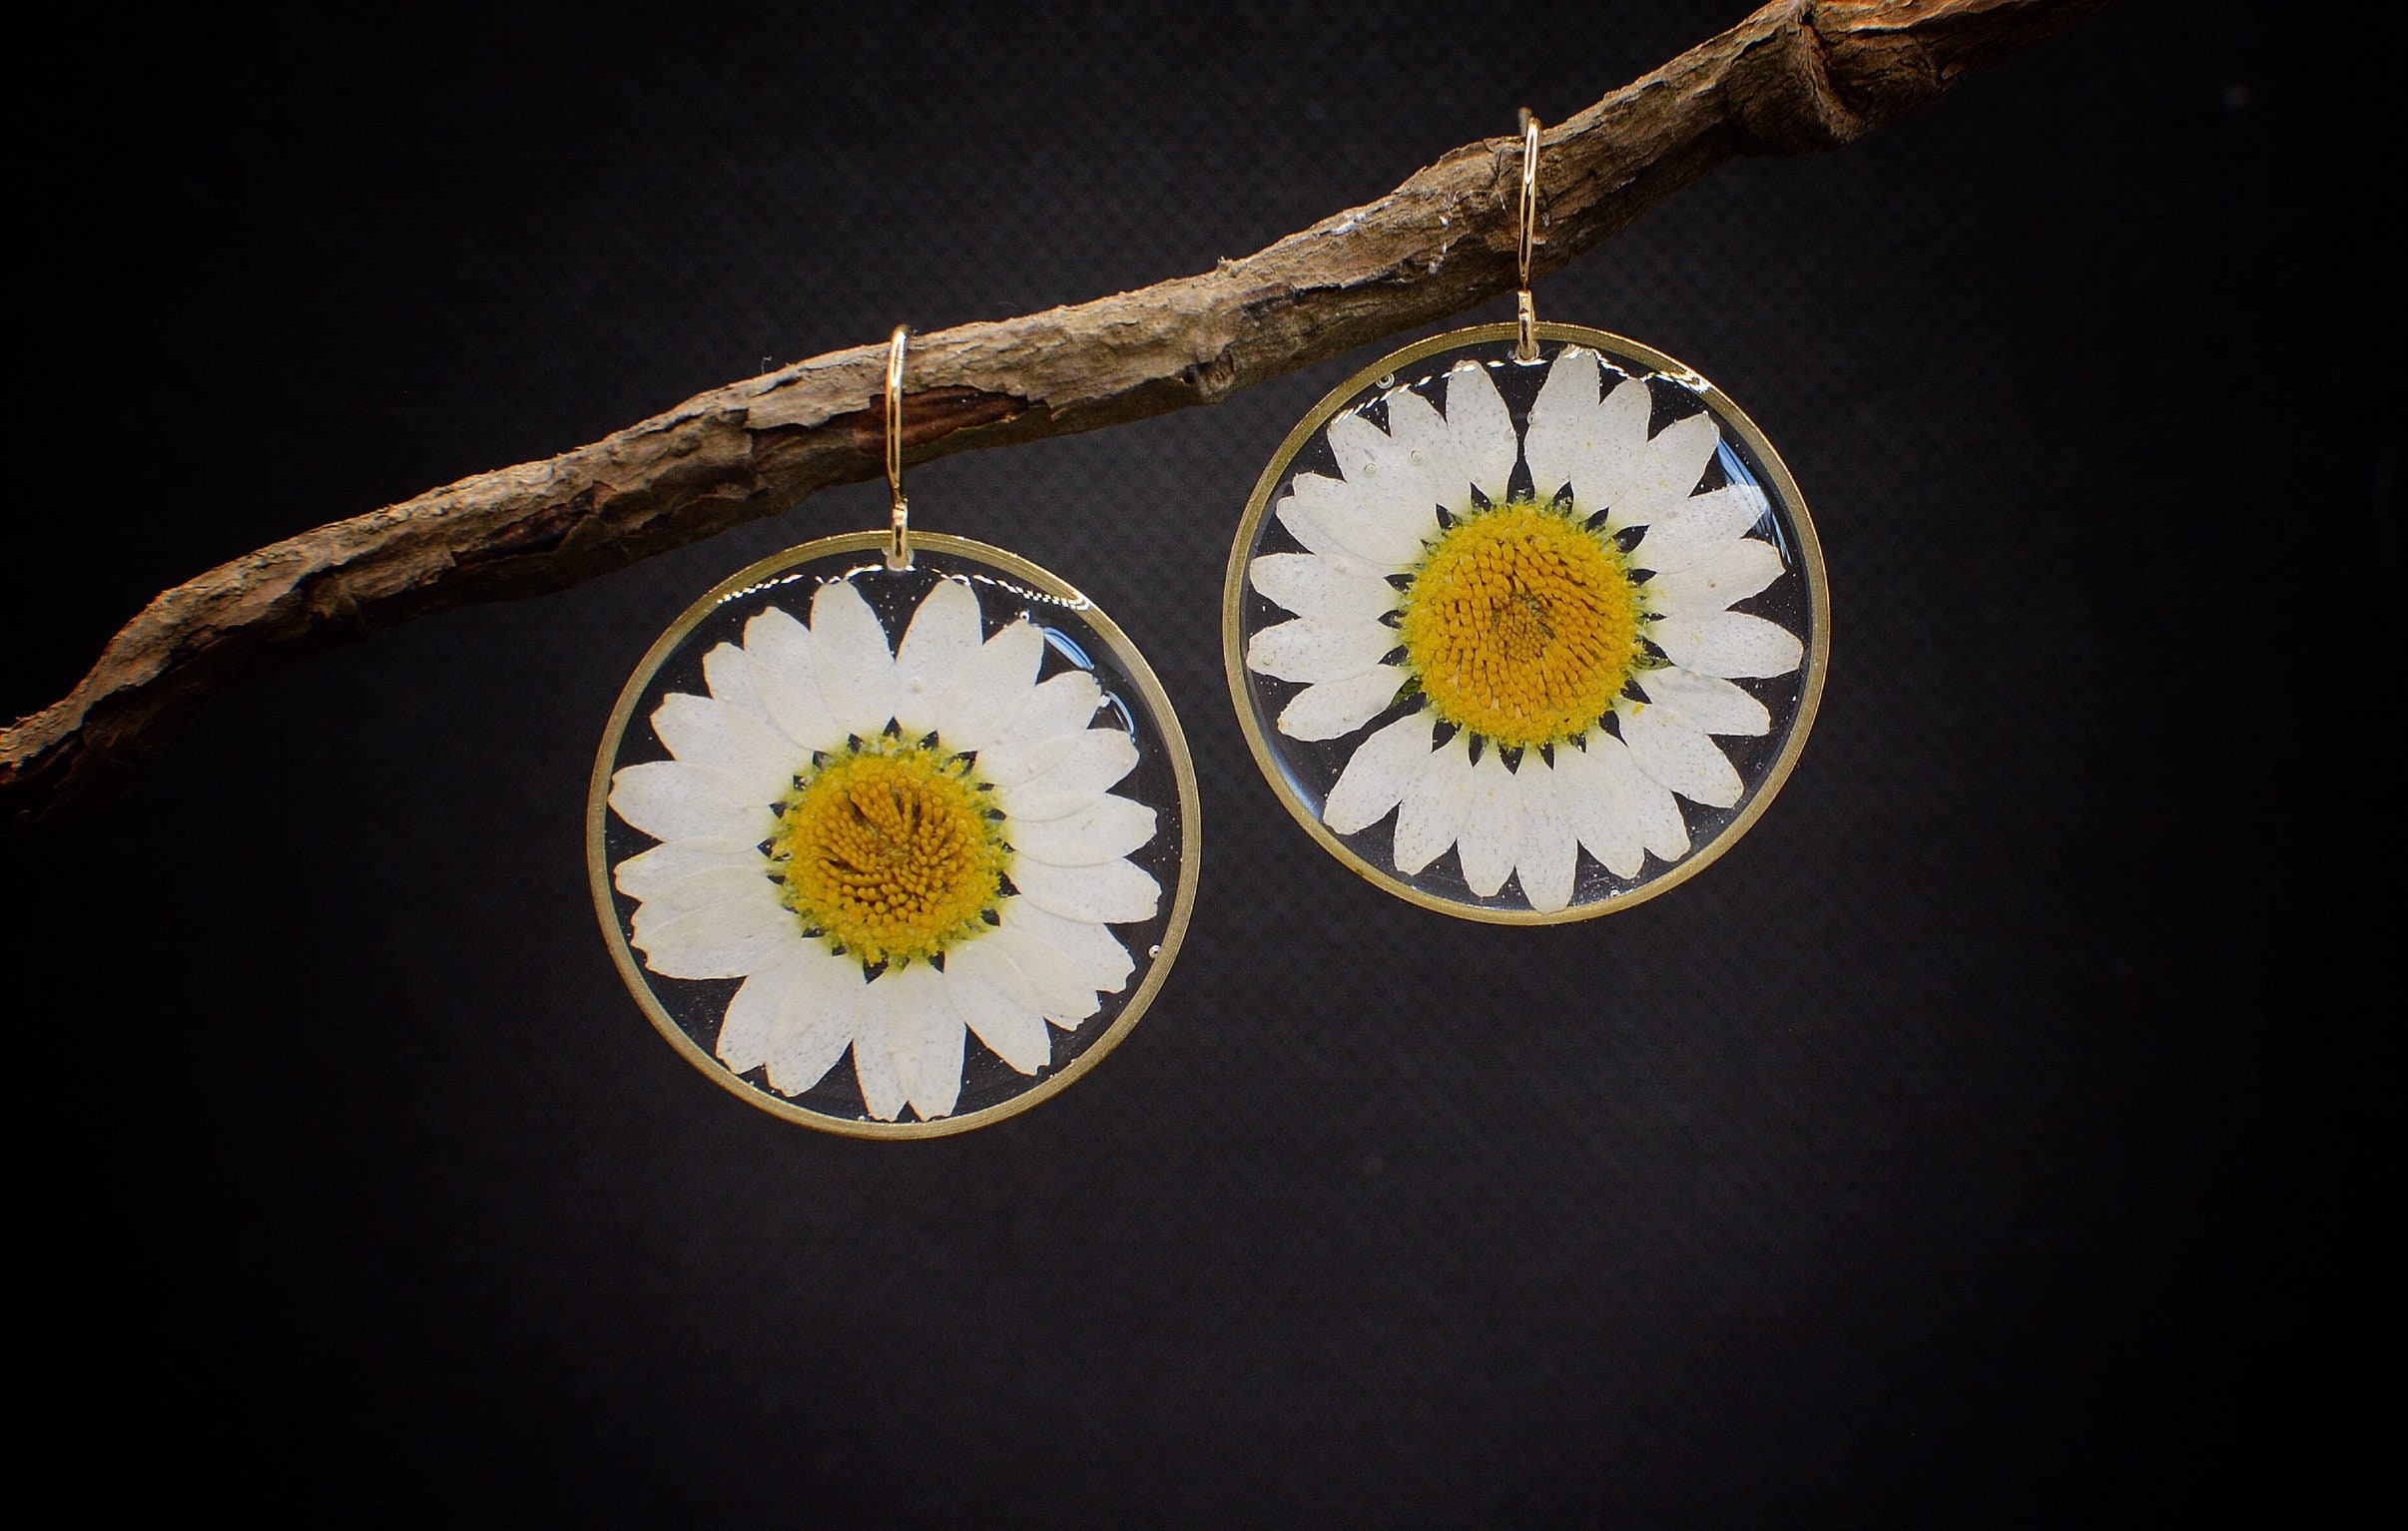 Real Daisy Dangle Earrings, Pressed Flowers, Mothers Day Gift For Her, Resin Jewelry, Boho Style, Botanical Handmade Jewellery